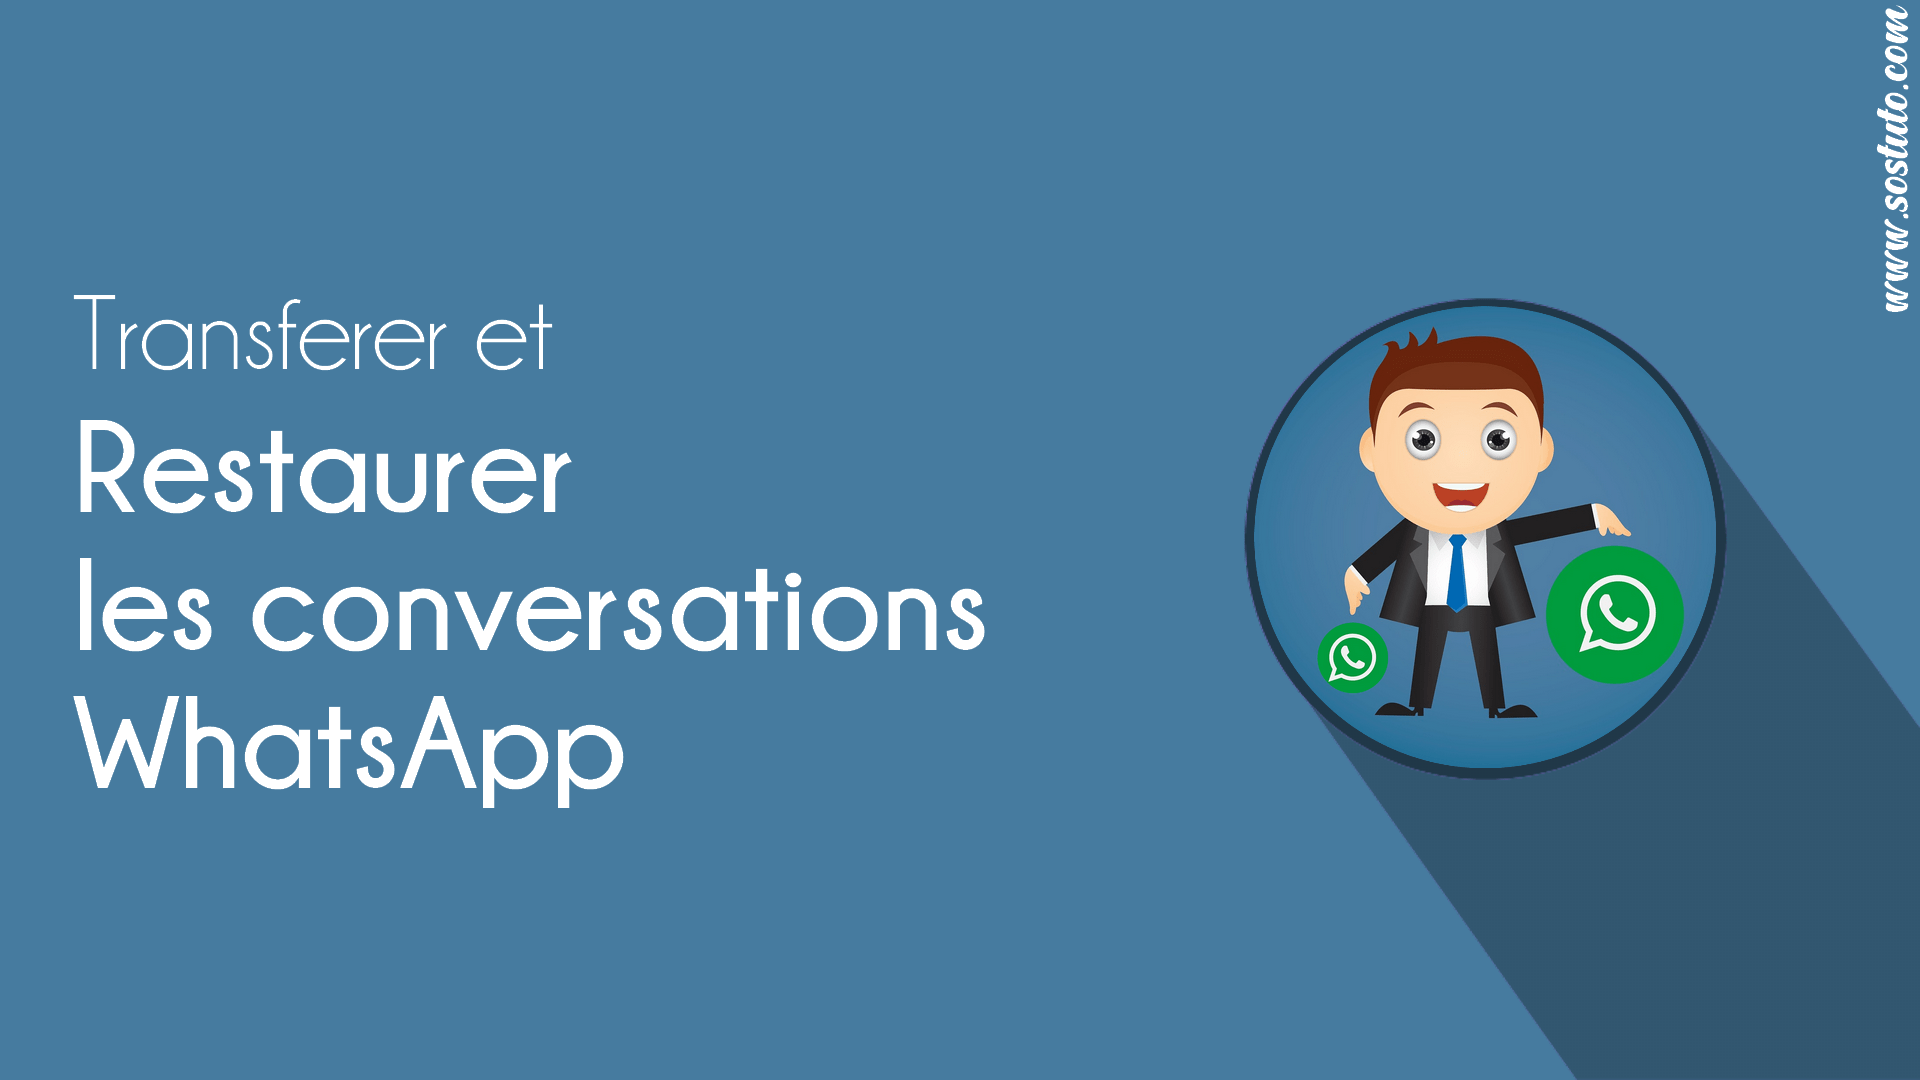 Transférer les conversations WhatsApp Comment transférer les conversations WhatsApp vers un nouveau smartphone Android